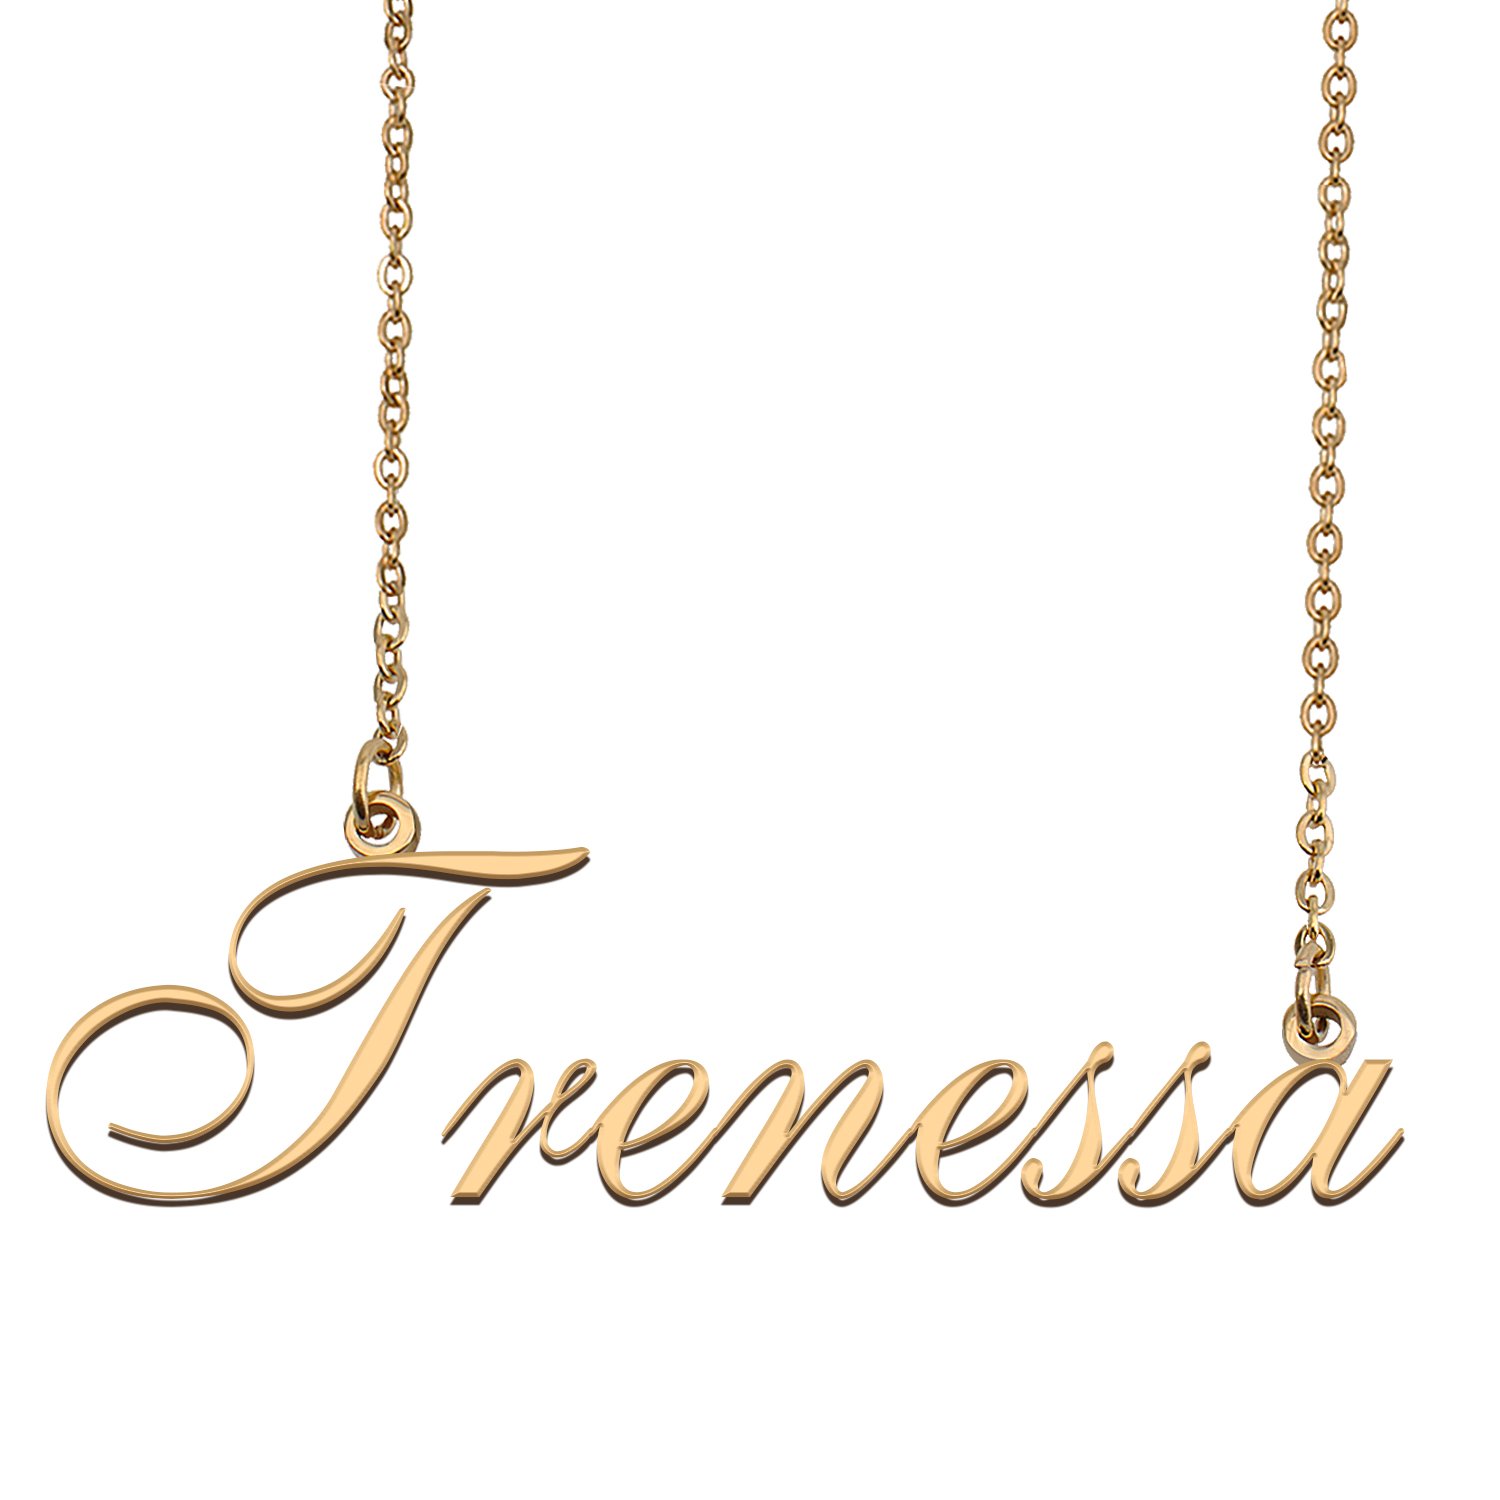 Custom Personalized Name Necklace in Golden Silver for Women Trenessa